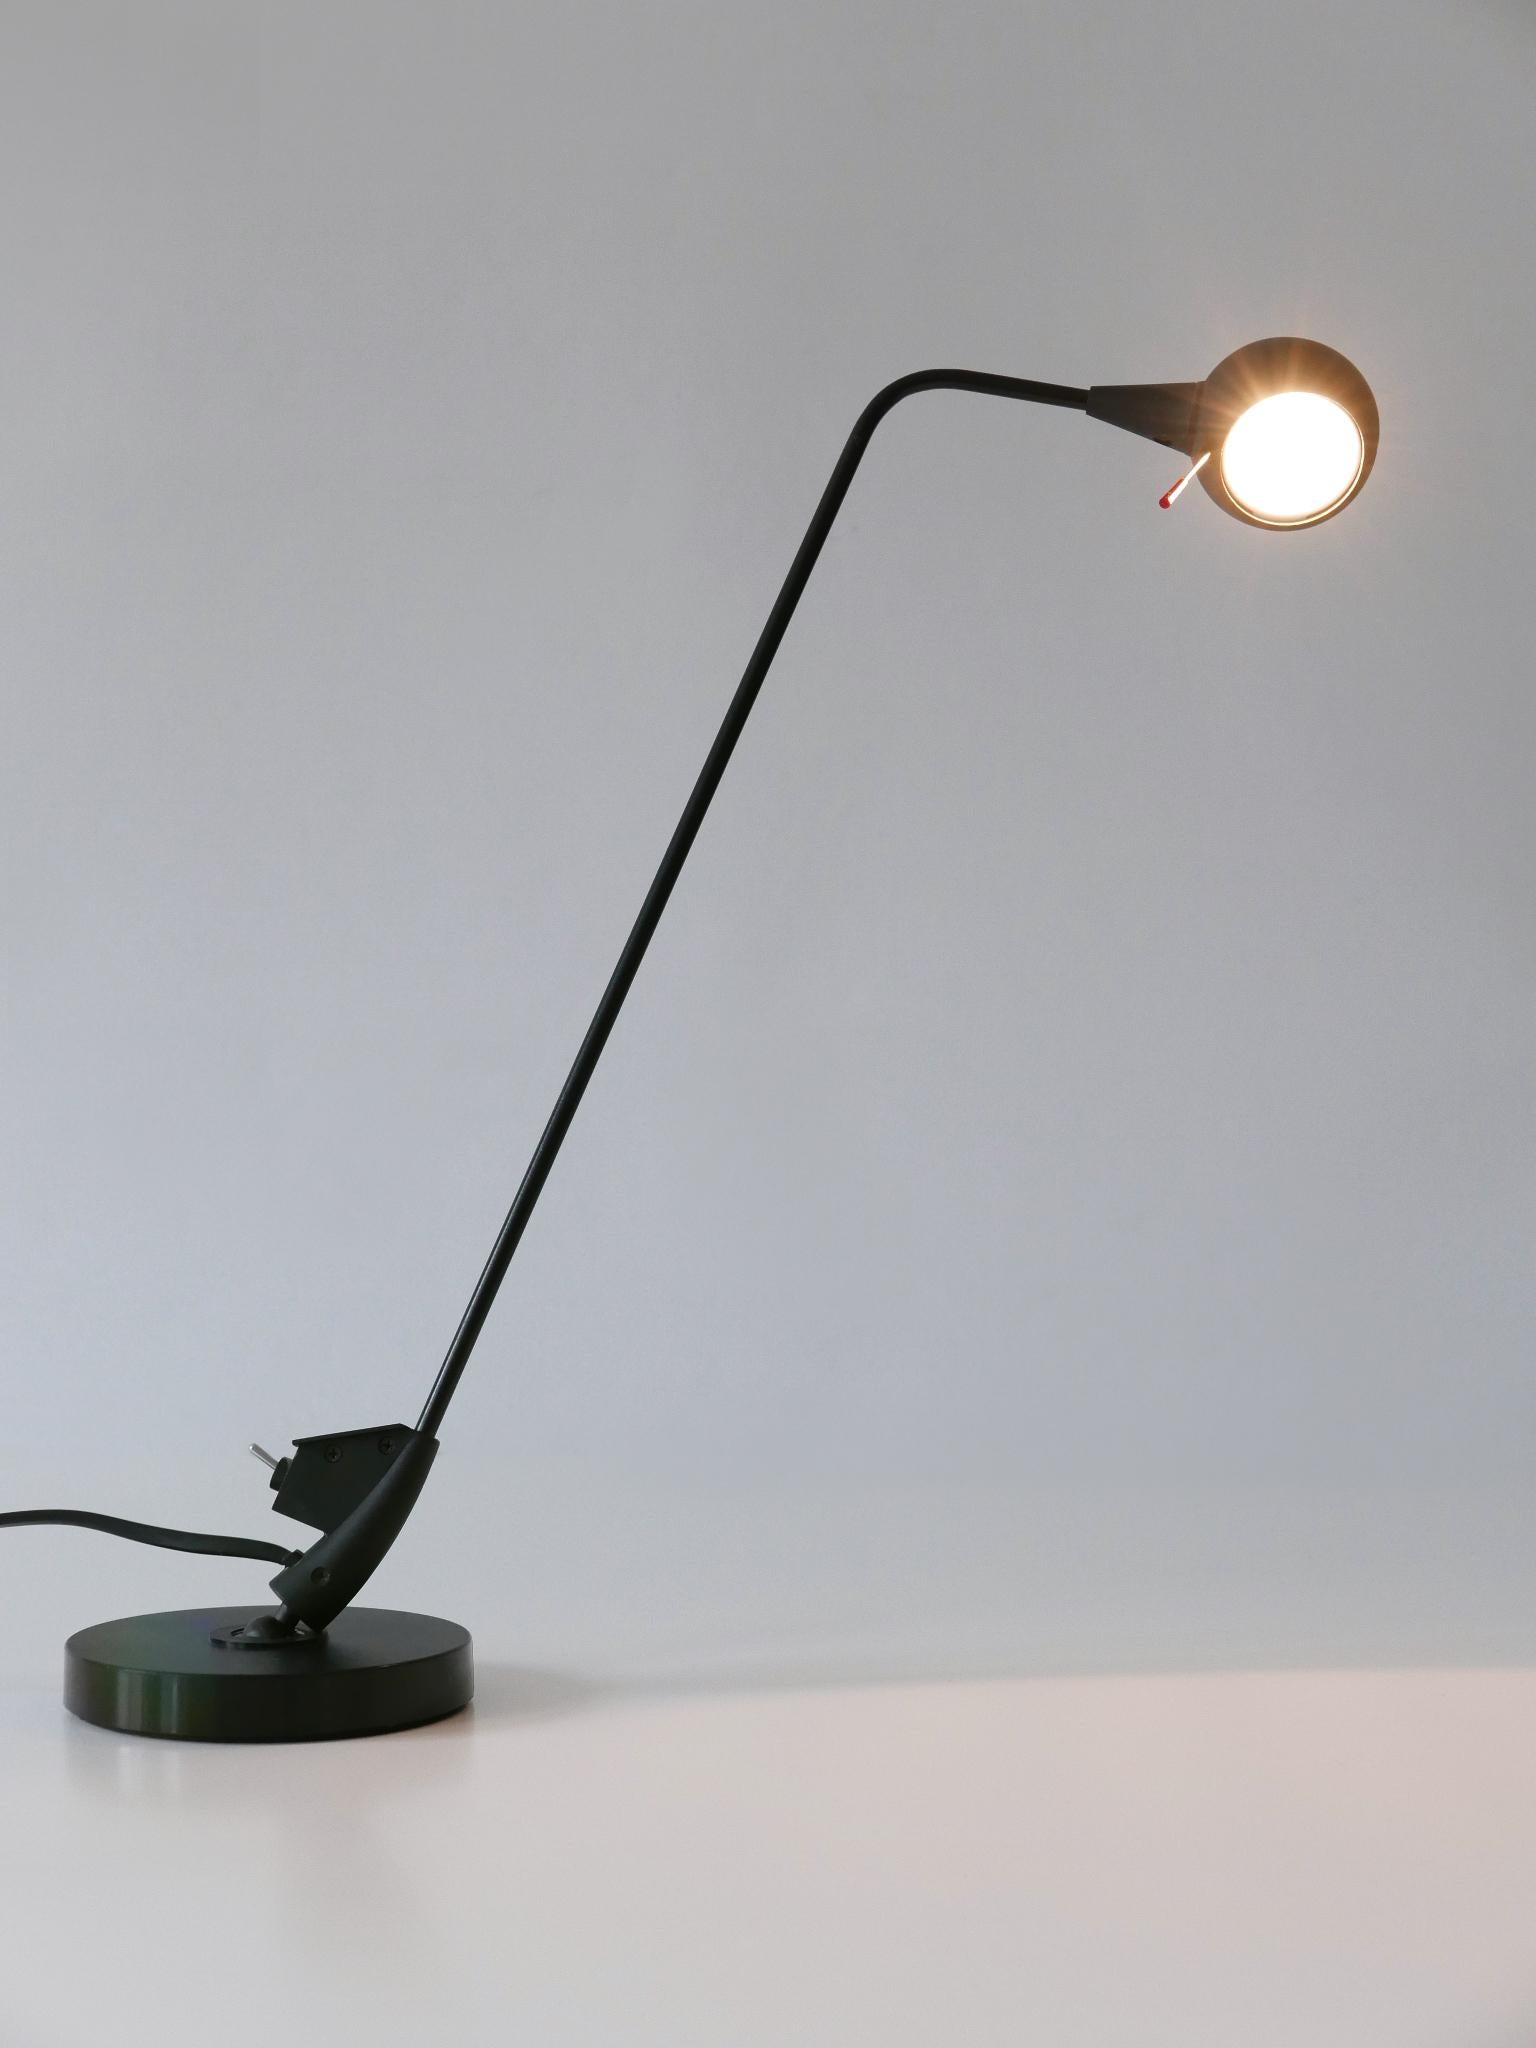 Late 20th Century Adjustable Postmodern Table Lamp Fire Fly by Emanuele Ricci for Artemide 1989 For Sale